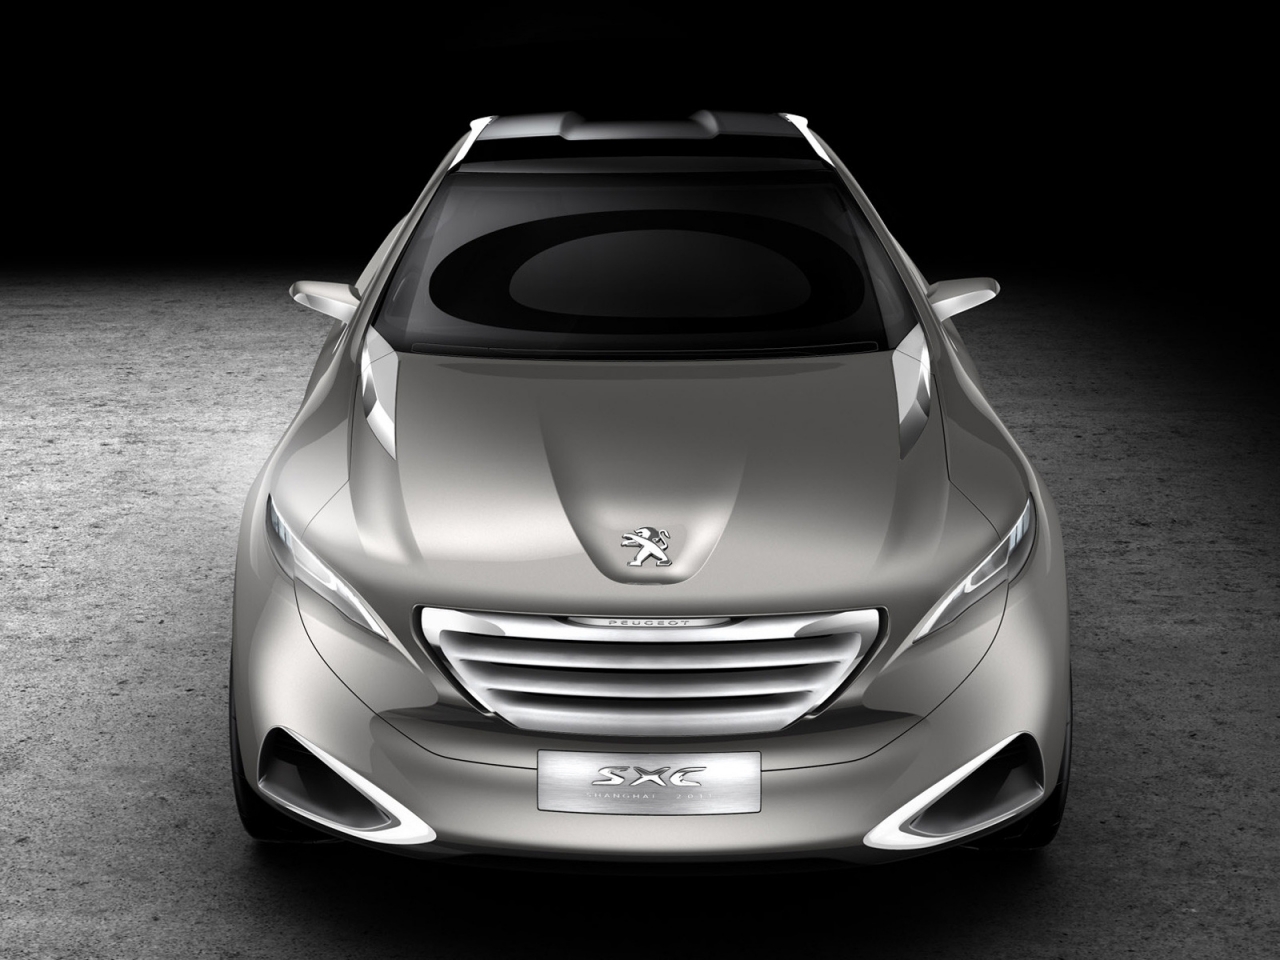 Peugeot SXC Concept Front for 1280 x 960 resolution